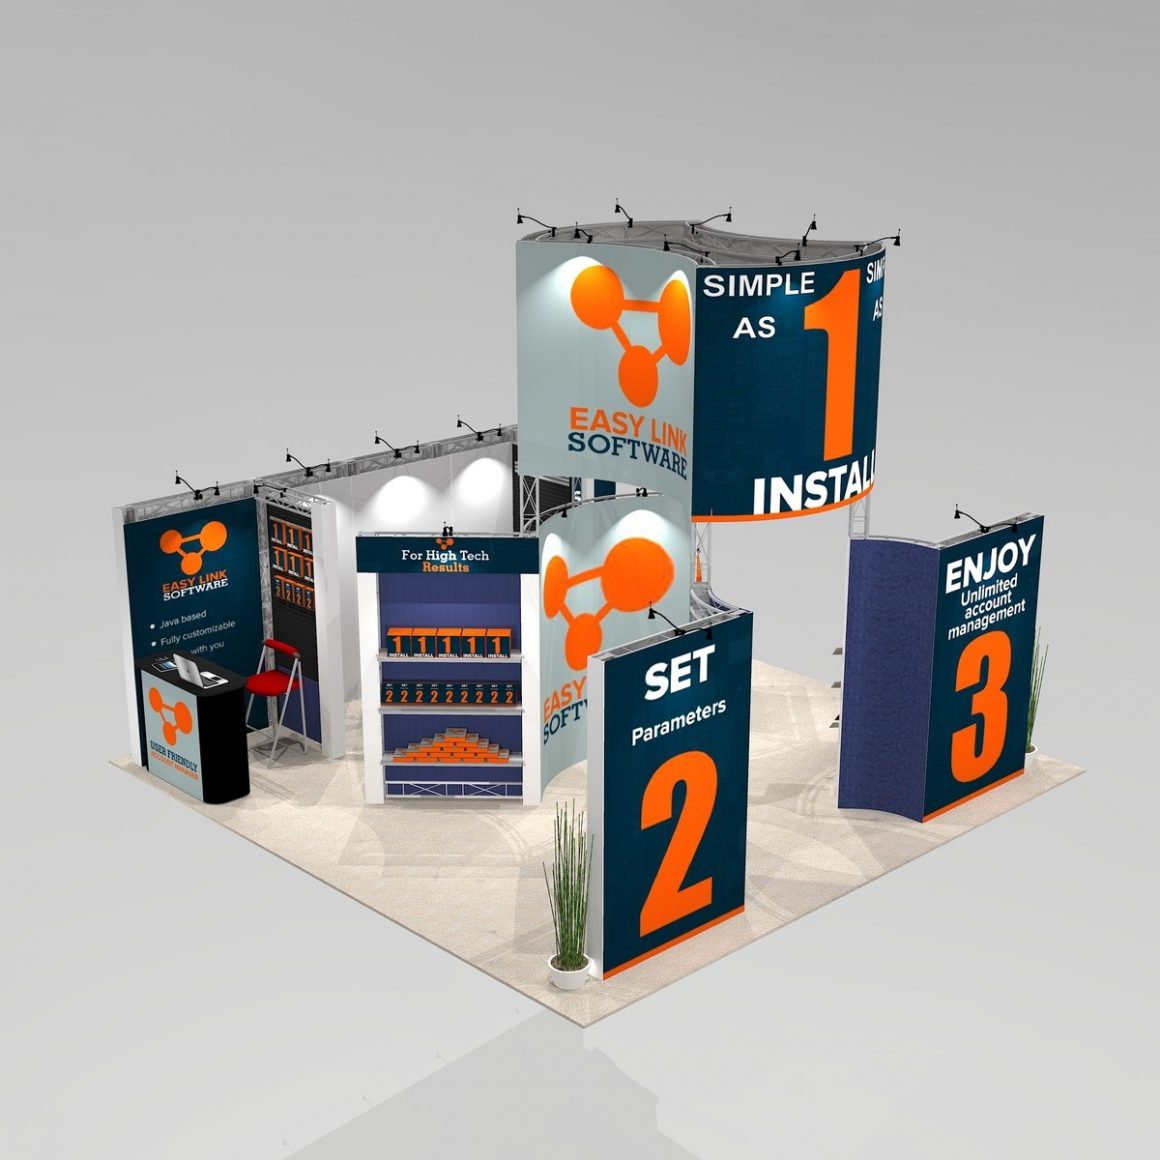 Merchandise and meeting trade show exhibit design BIG2020 Graphic Package C